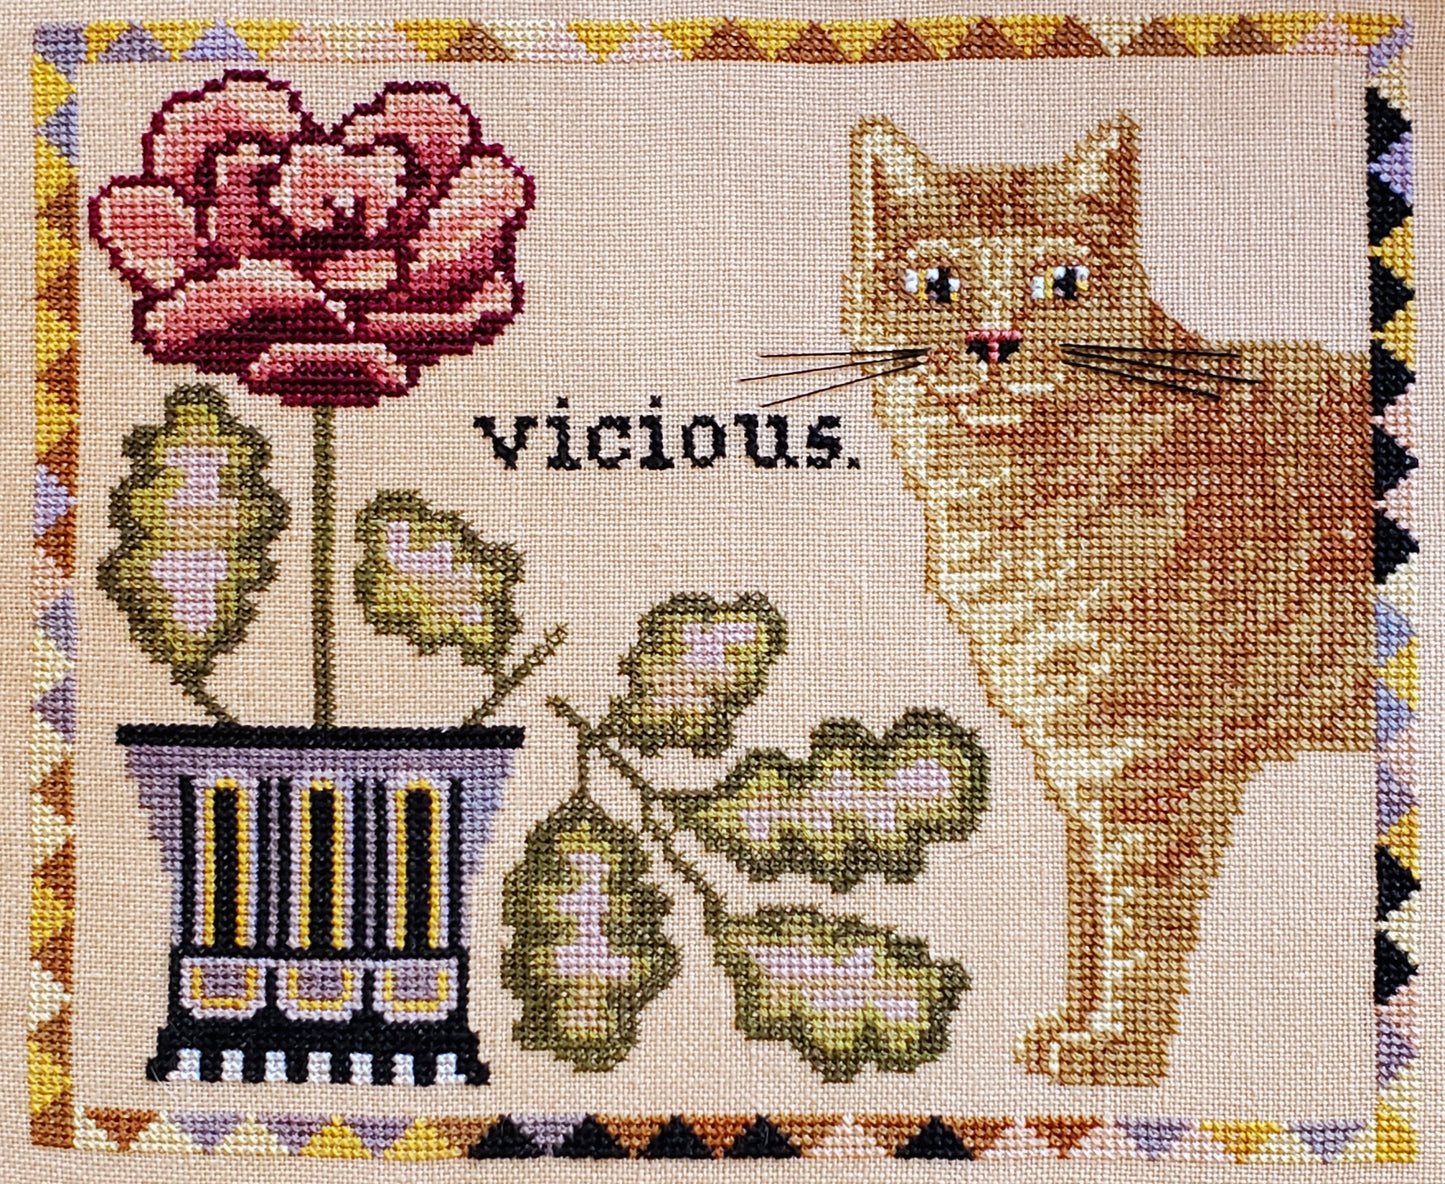 Vicious - Cross Stitch Pattern by The Artsy Housewife - PREORDER